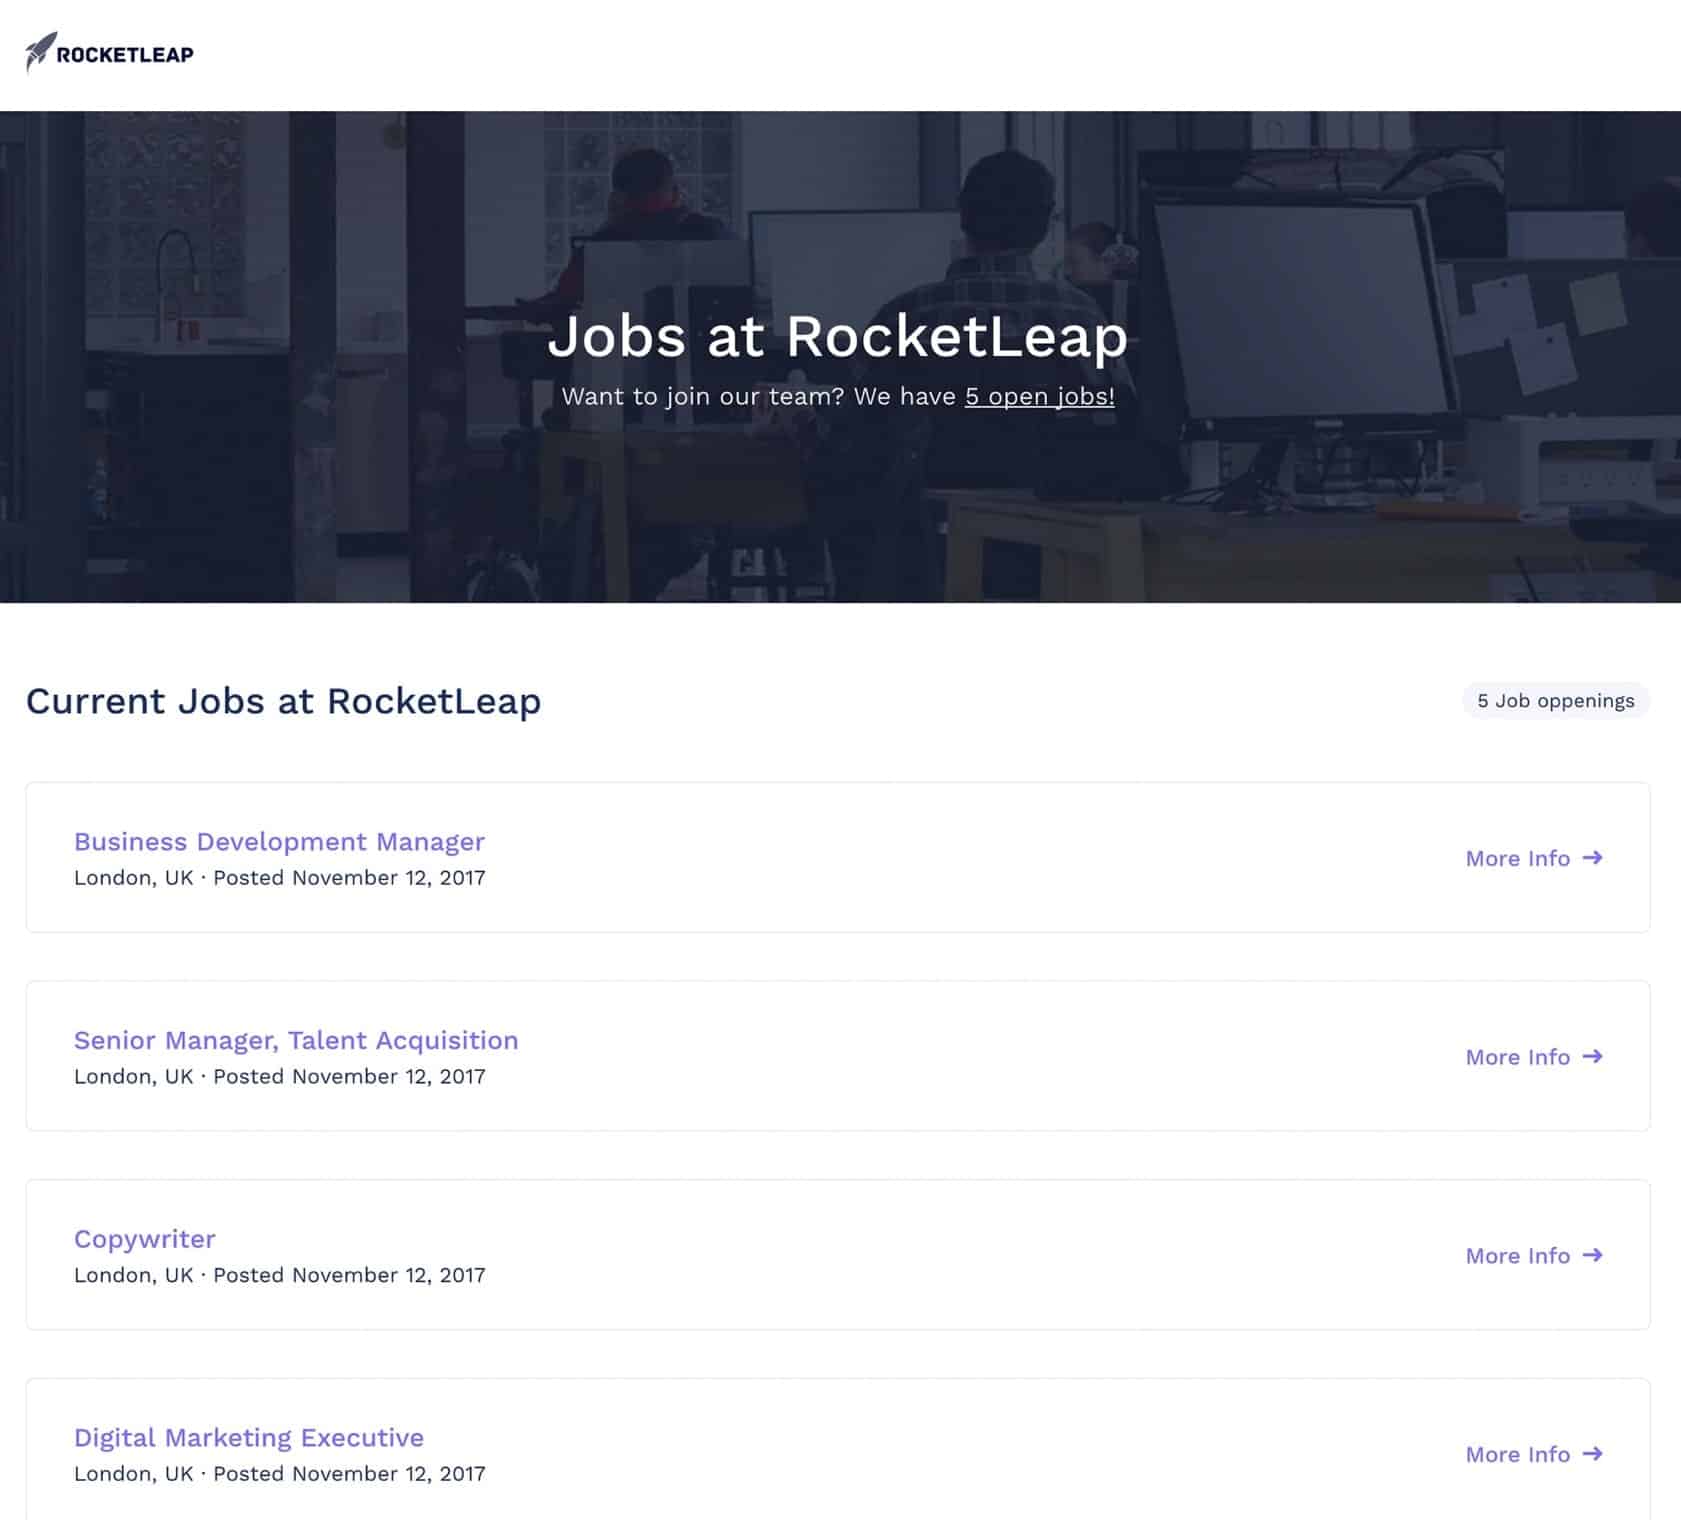 Automatically update jobs on your company website